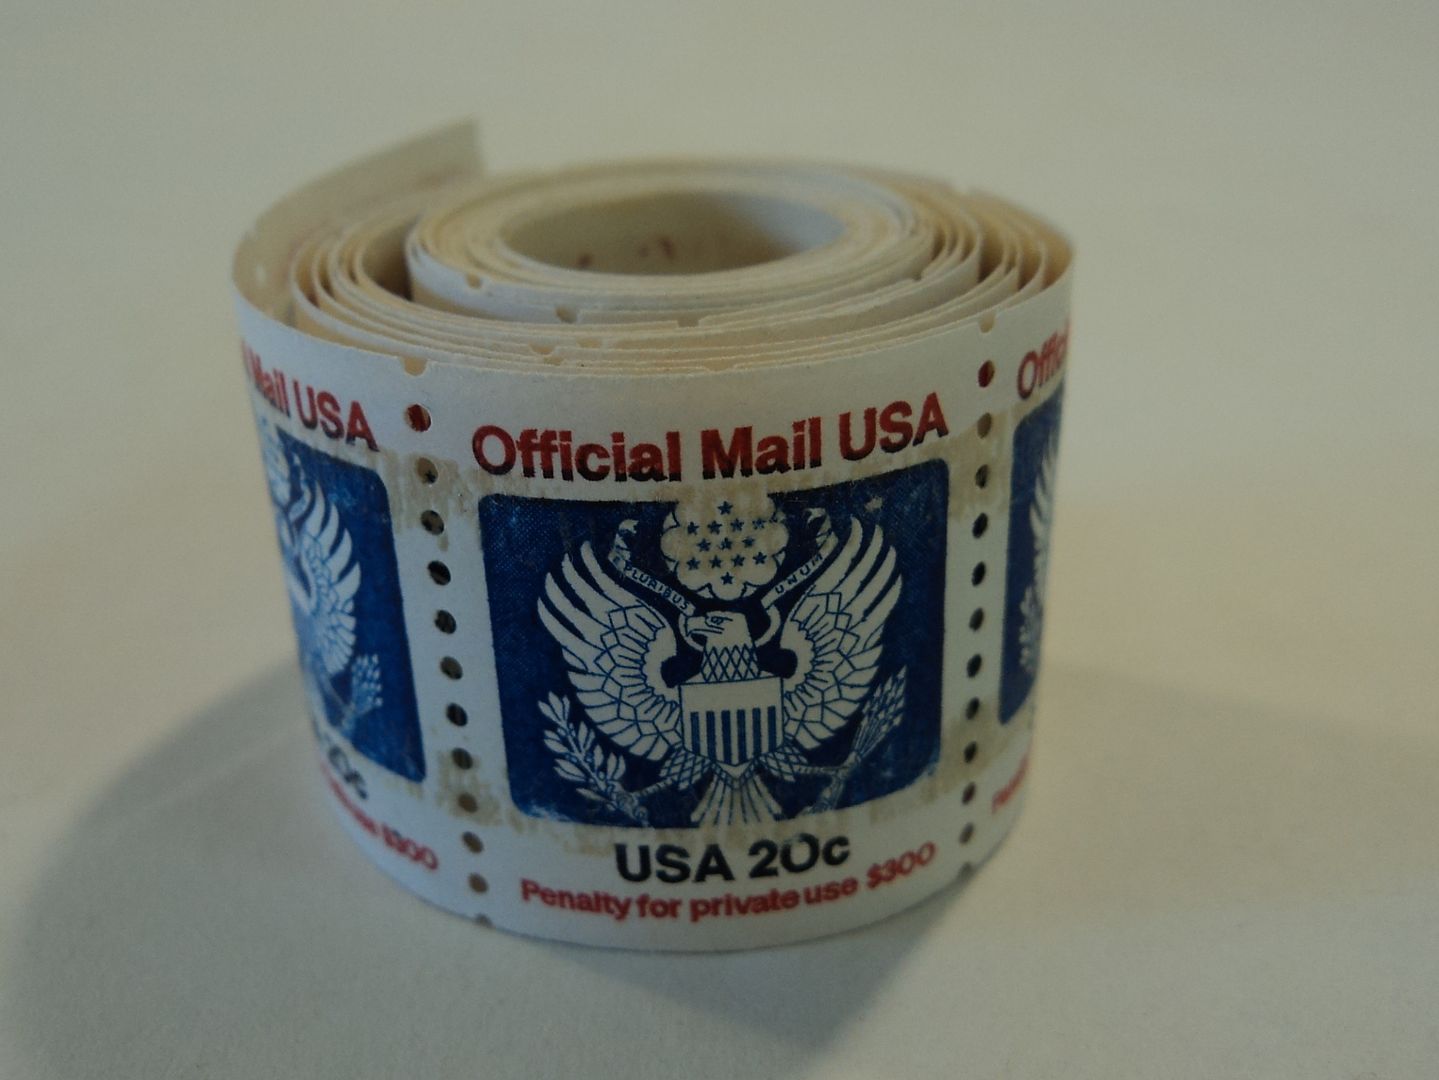 USPS Scott O135 Official Mail USA 20c Mint Coil Lot of 100 Great Seal 1983